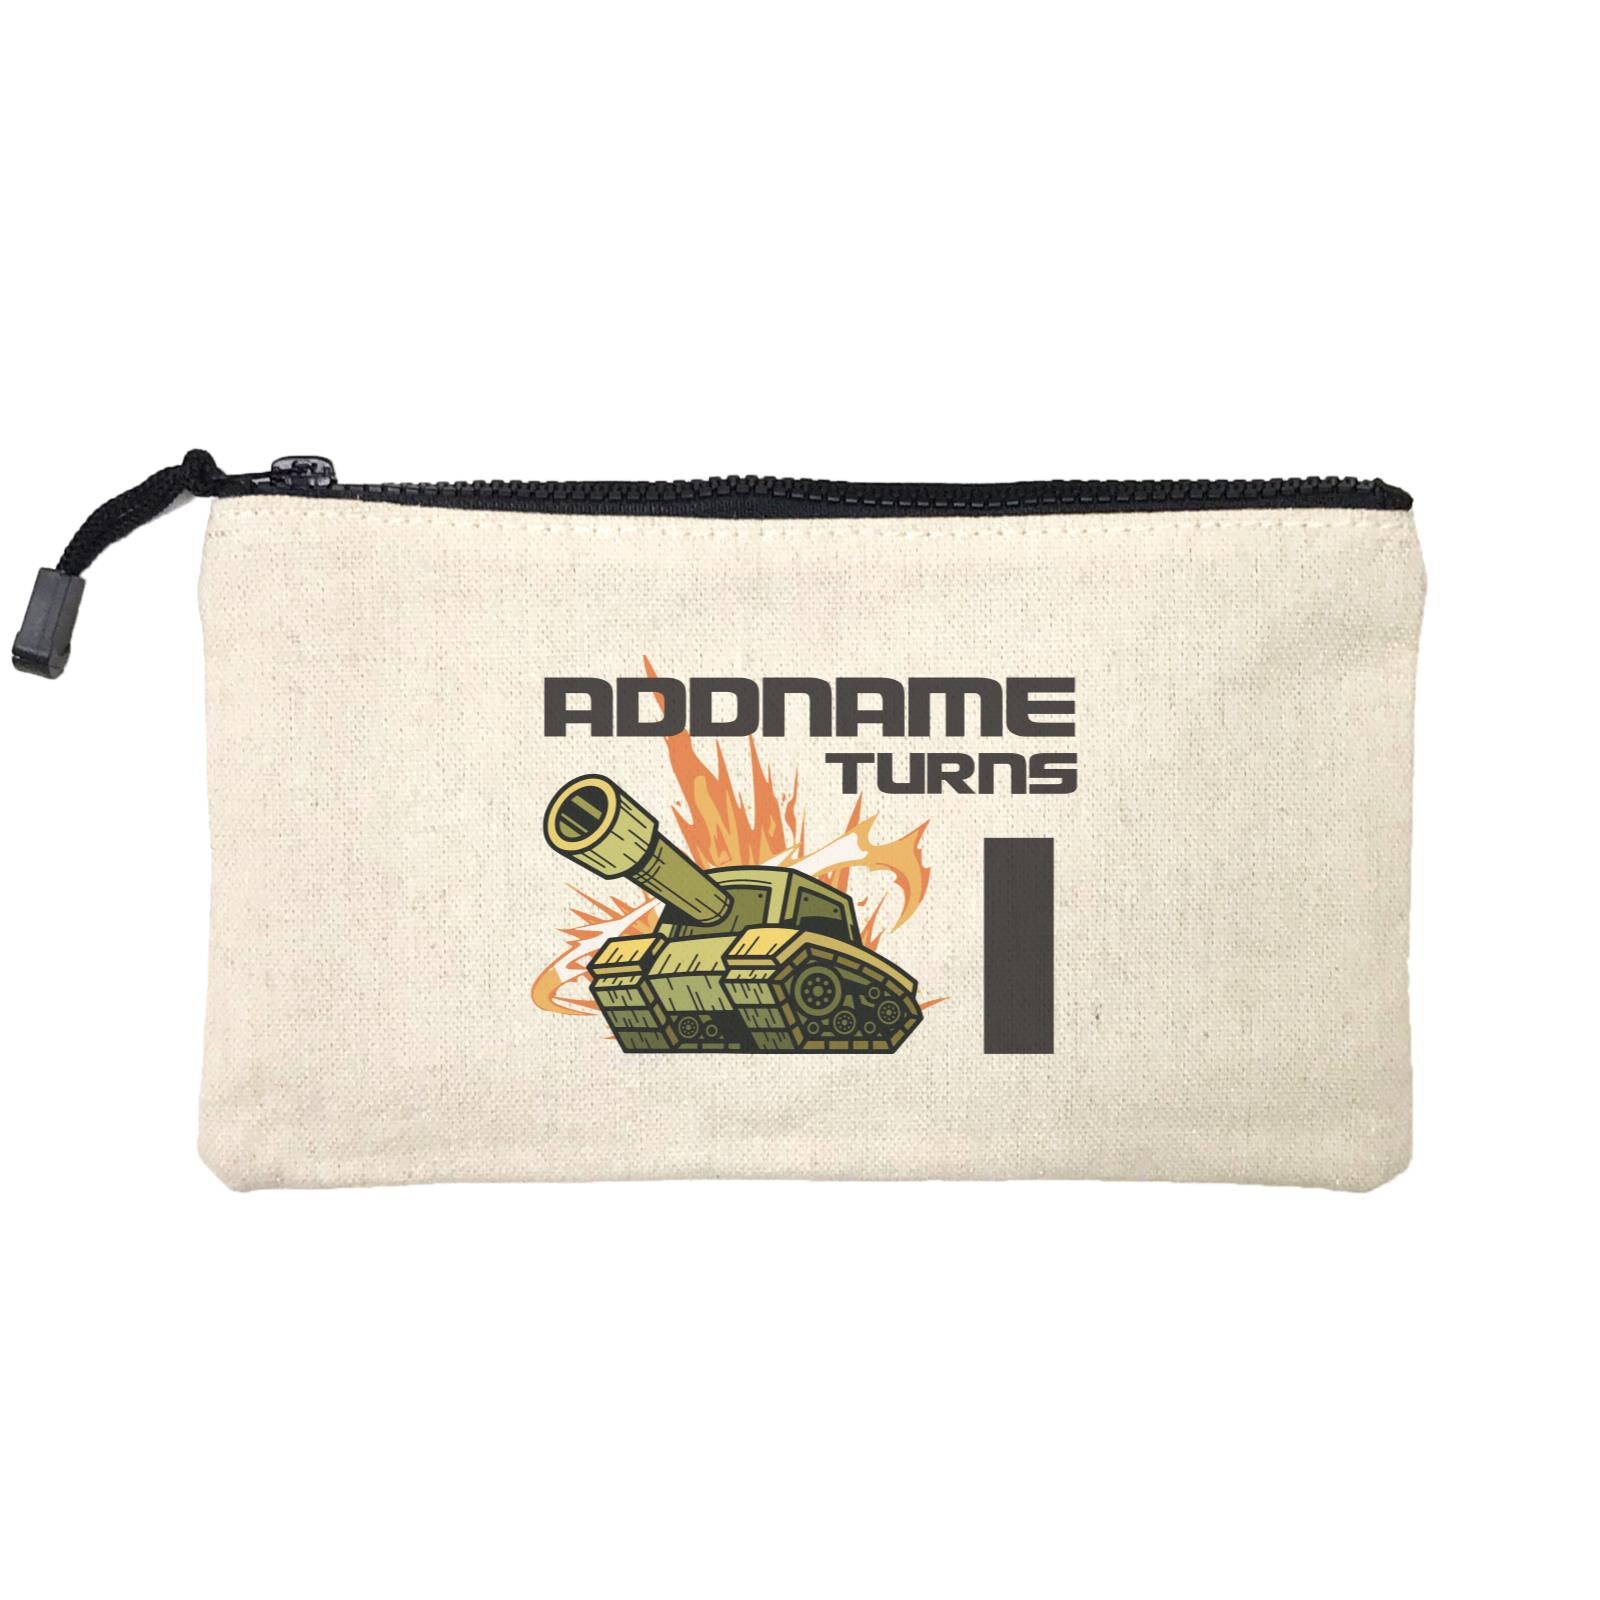 Birthday Battle Theme Tank Addname Turns 1  Mini Accessories Stationery Pouch